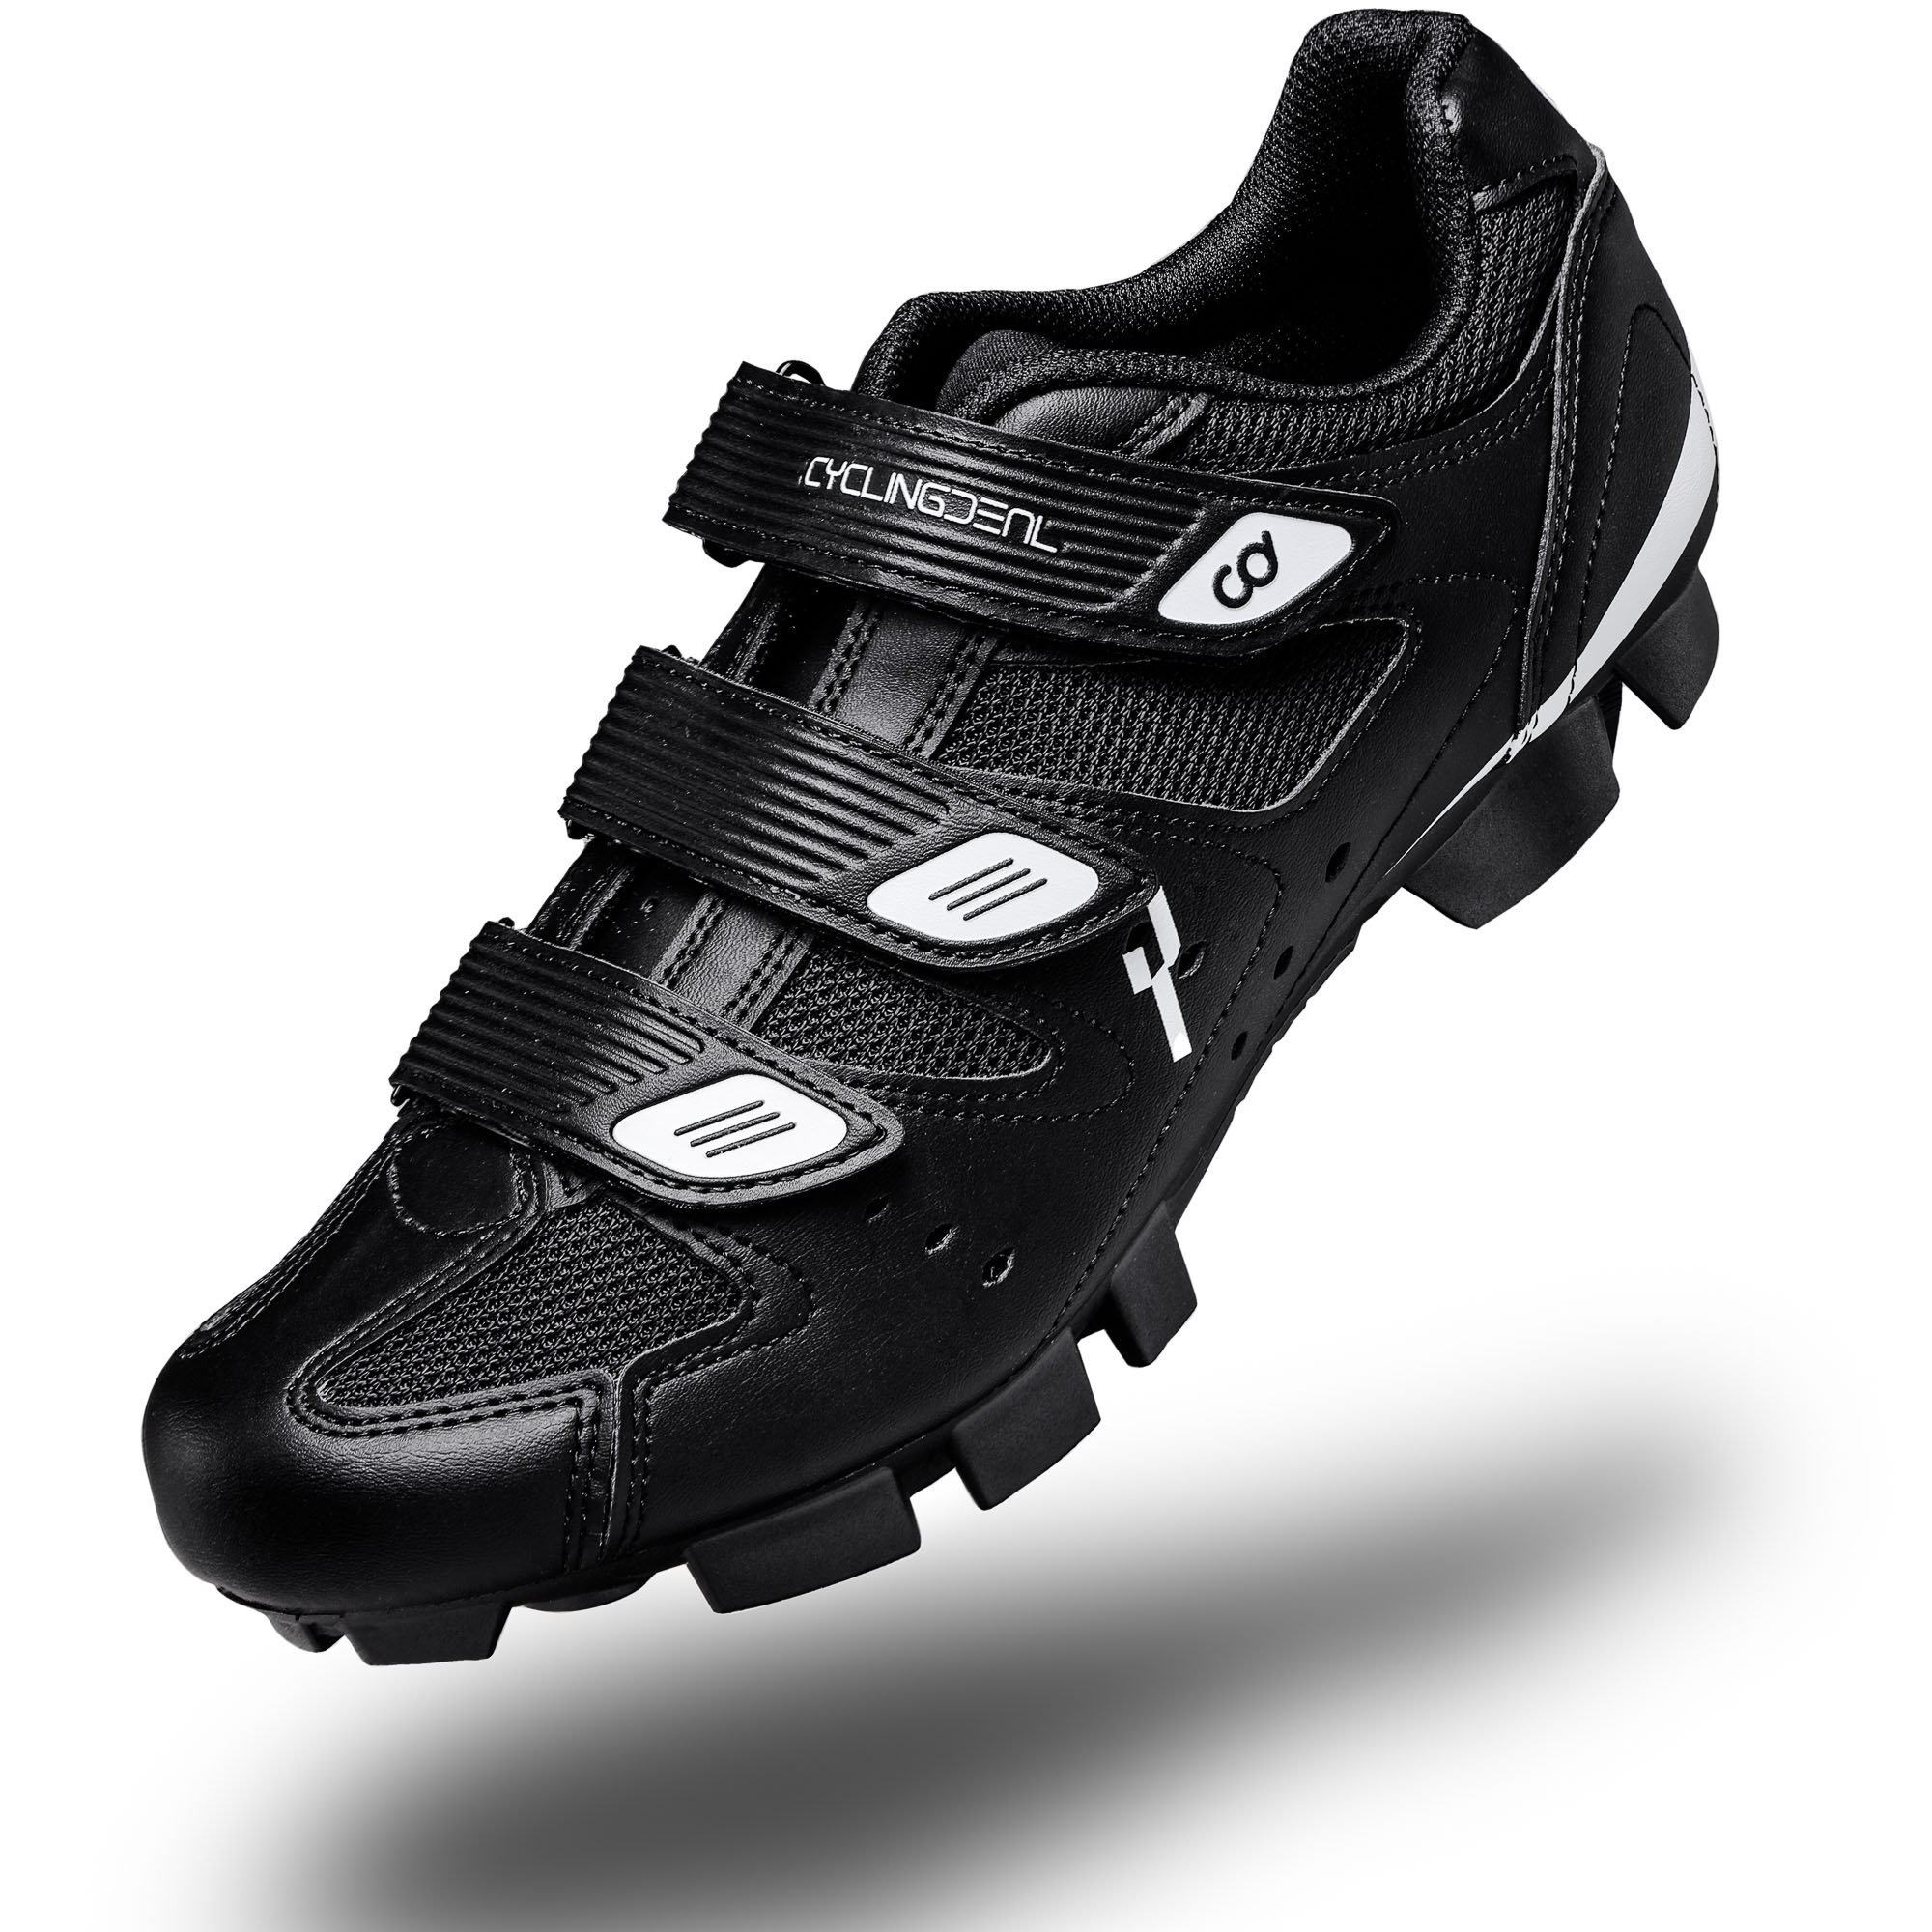 CyclingDeal Mountain Bicycle Bike Men's MTB Cycling Shoes Black Compatible with SHIMANO SPD and CrankBrothers Cleats | Size 48